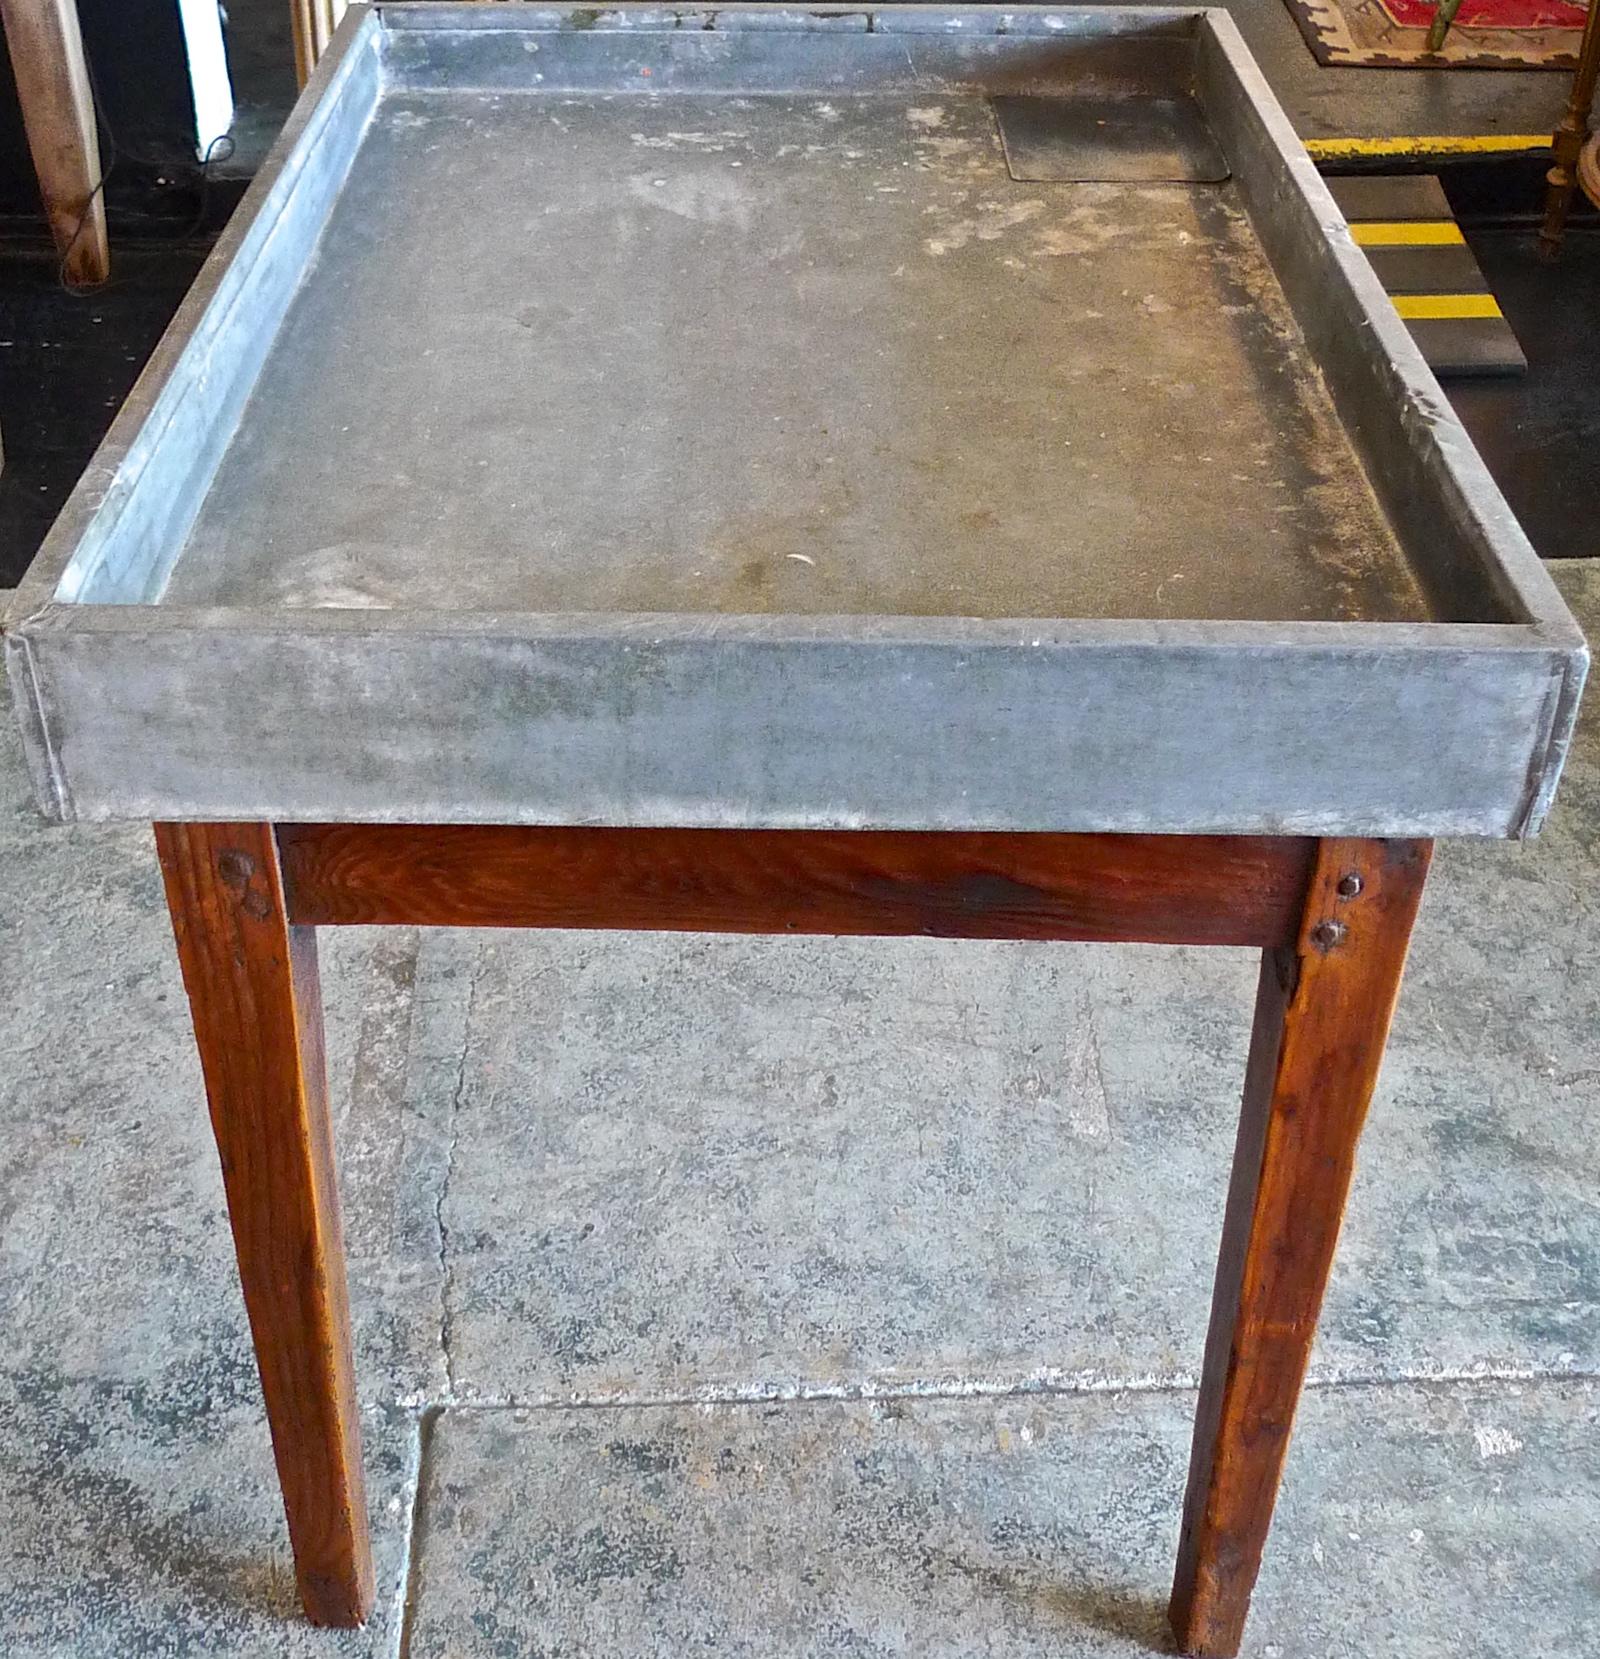 French 19th century zinc top flower or vegetable potting table on a stained wood frame with one corner drainage hole.